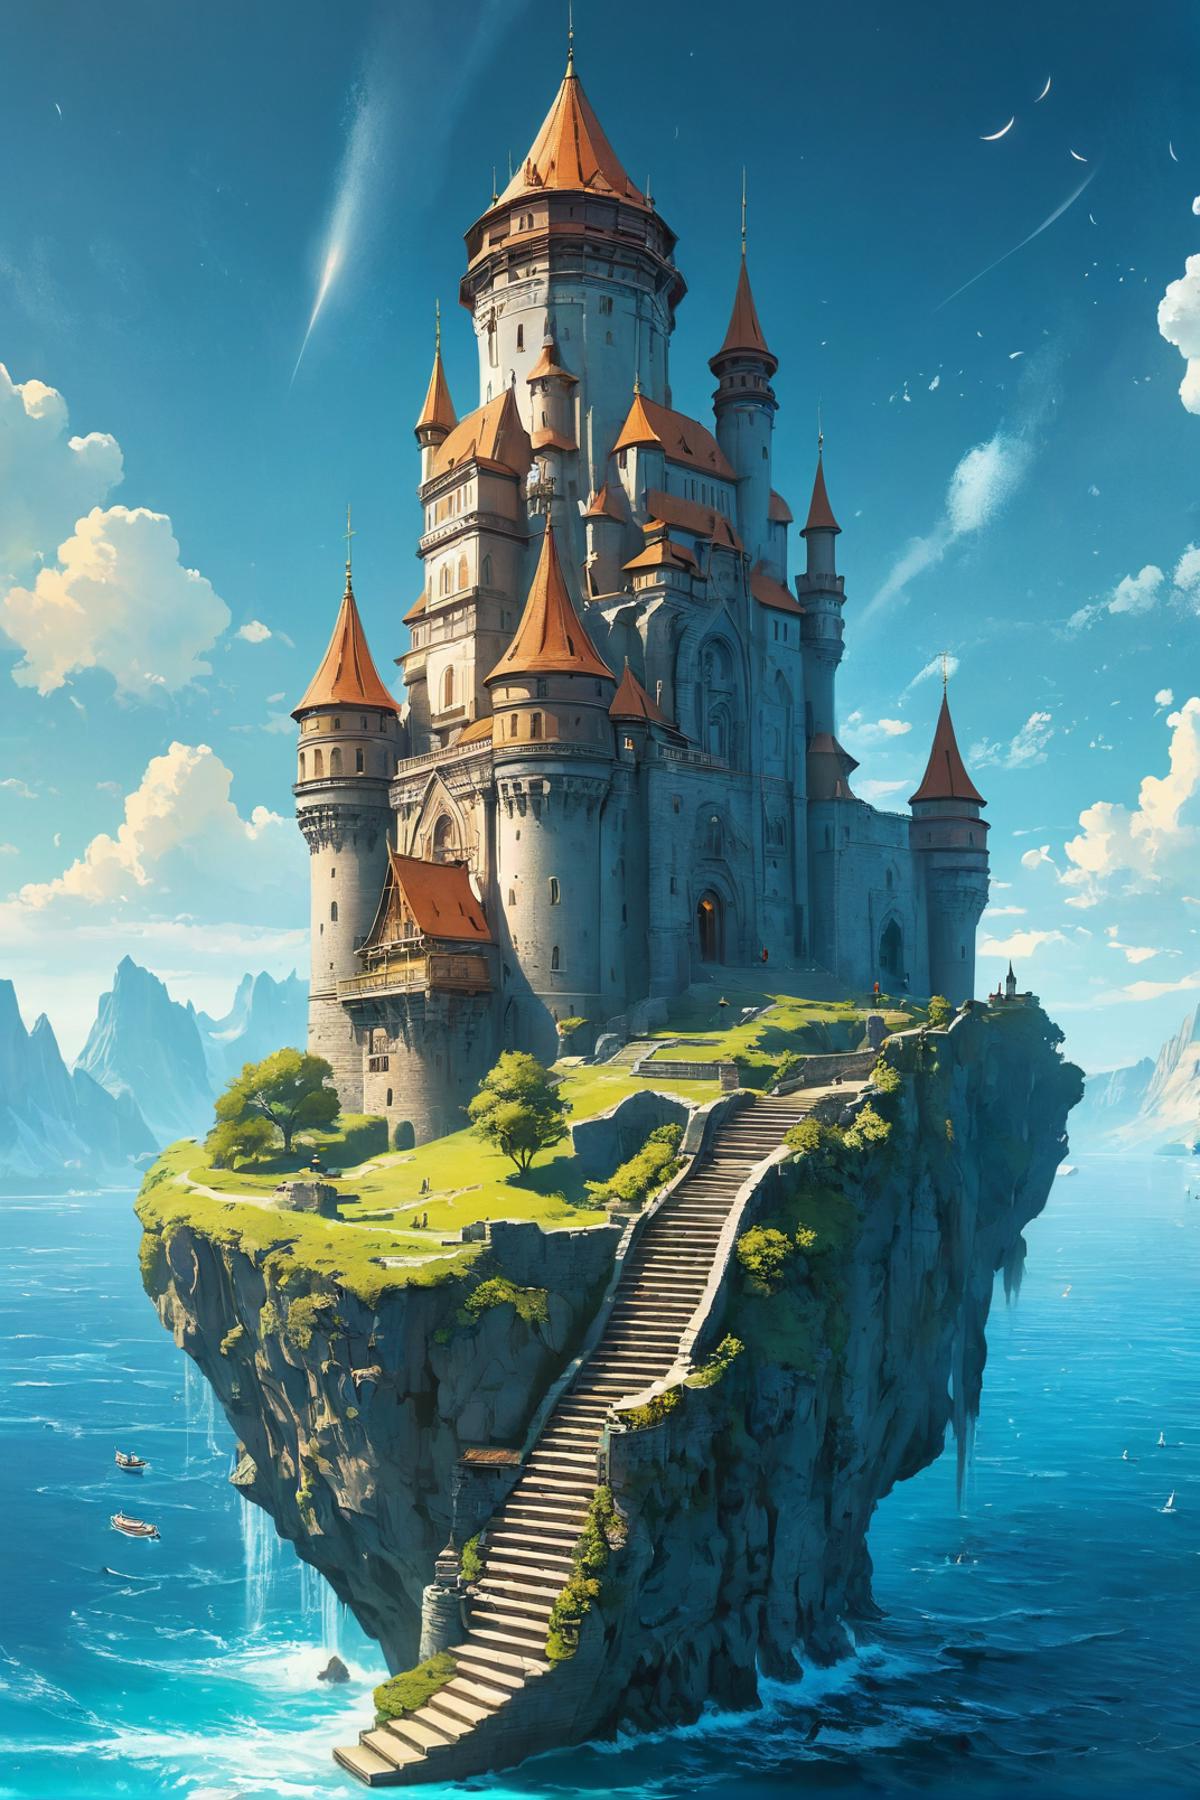 A castle is built on top of a large rock surrounded by water.